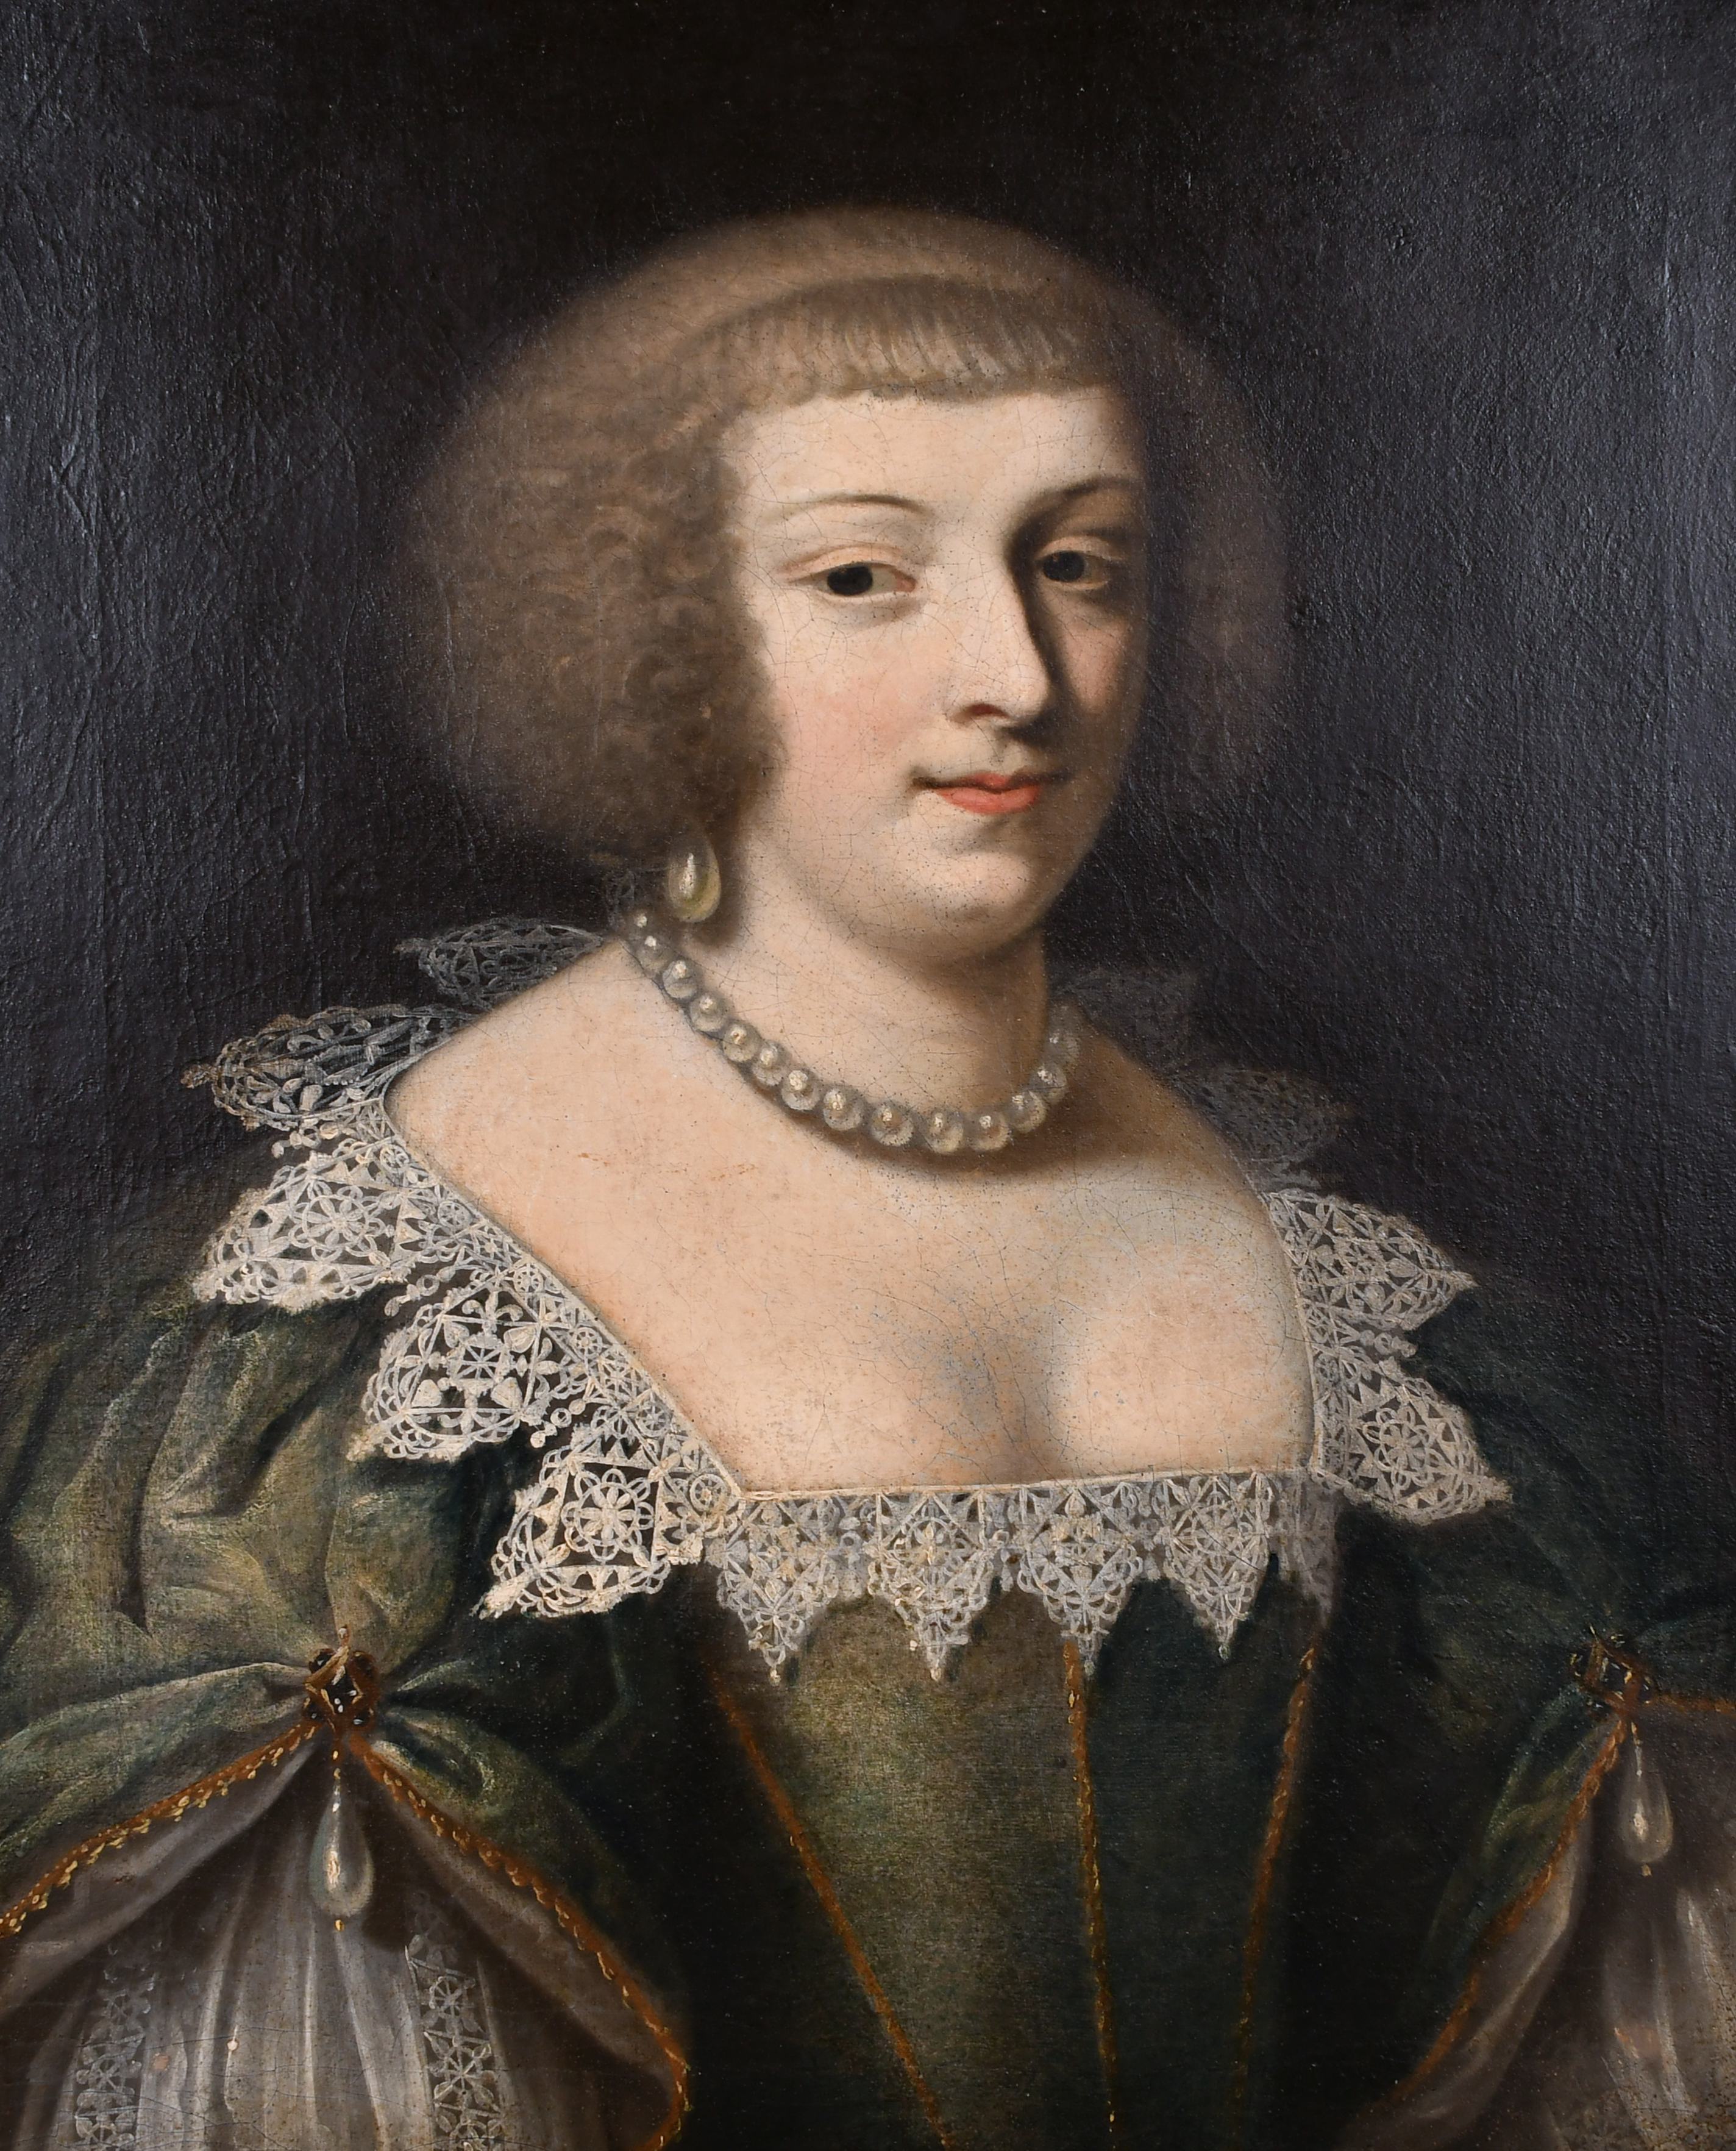 17th Century English School. "Portrait of Mrs Pemberton", Oil on canvas, Inscribed on a label on the